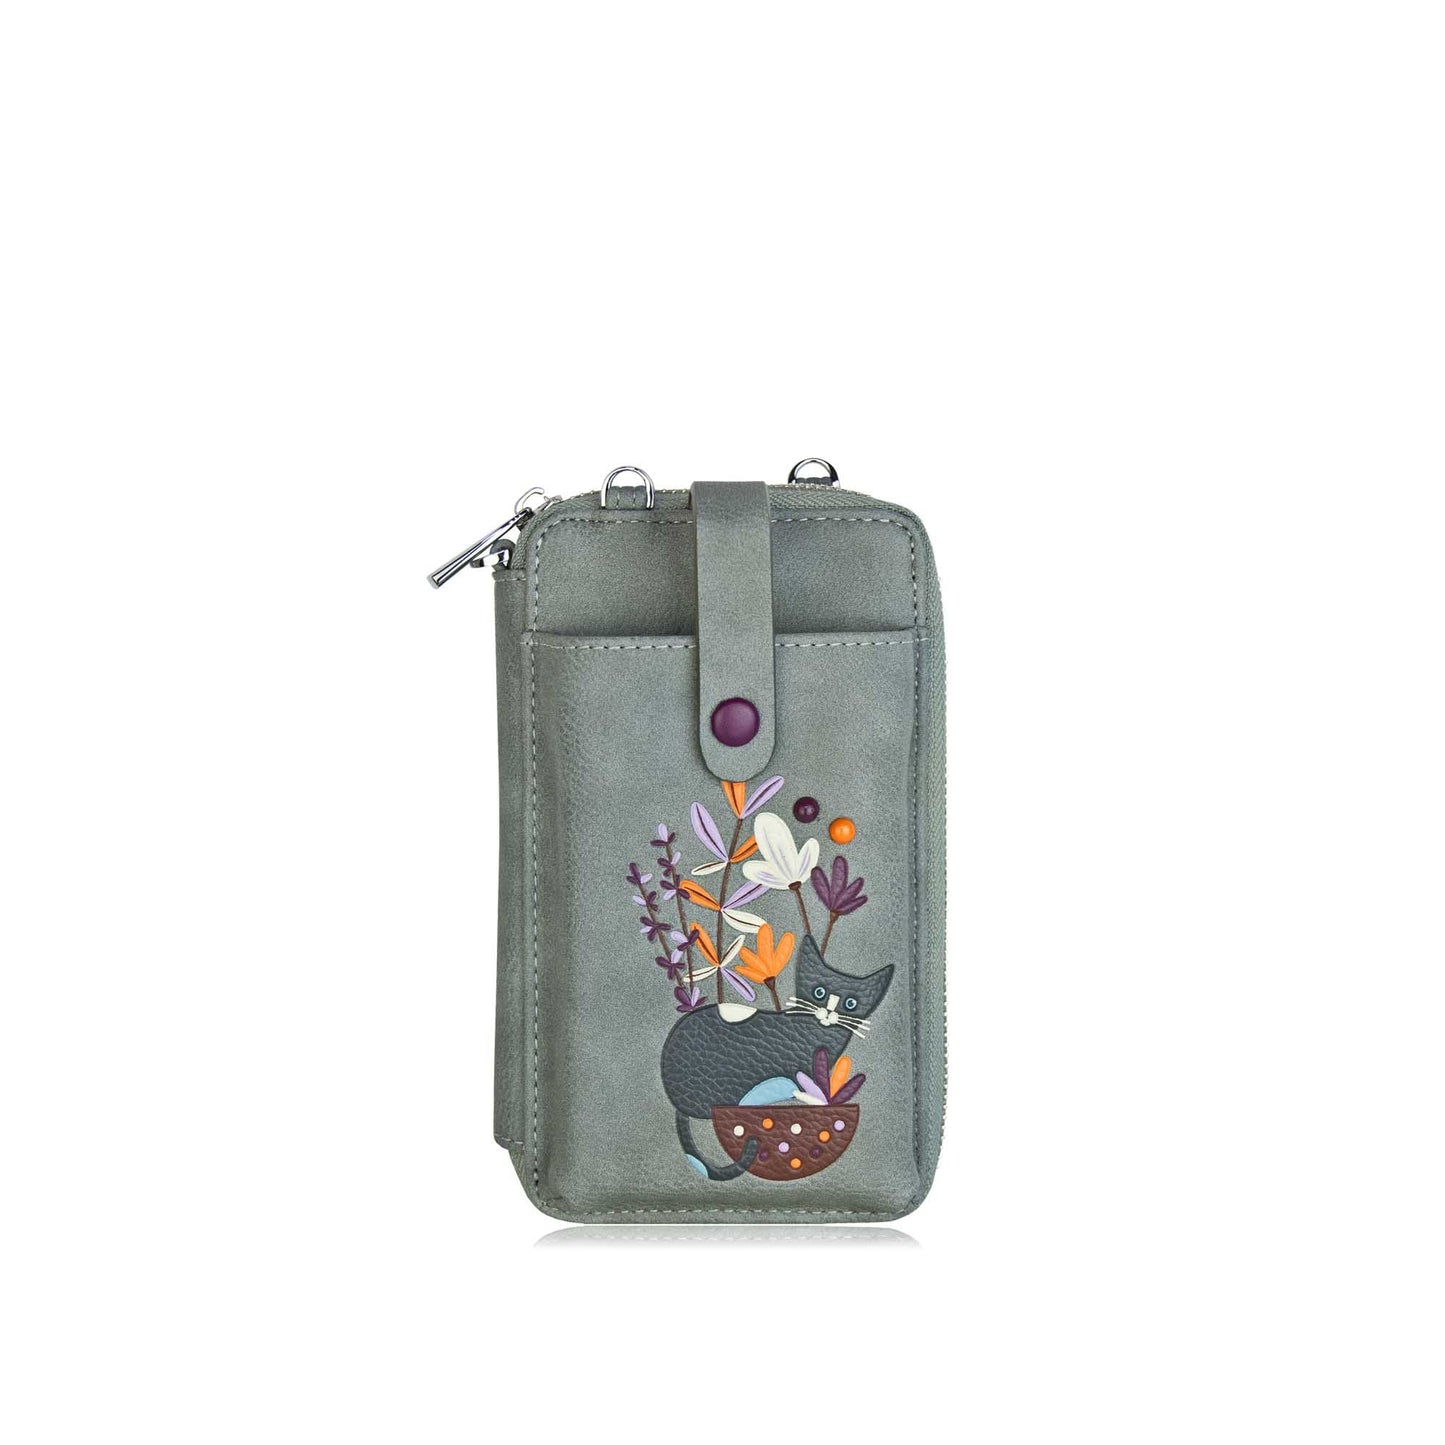 Willow Crossbody Smartphone Pouch Wallet - Grey